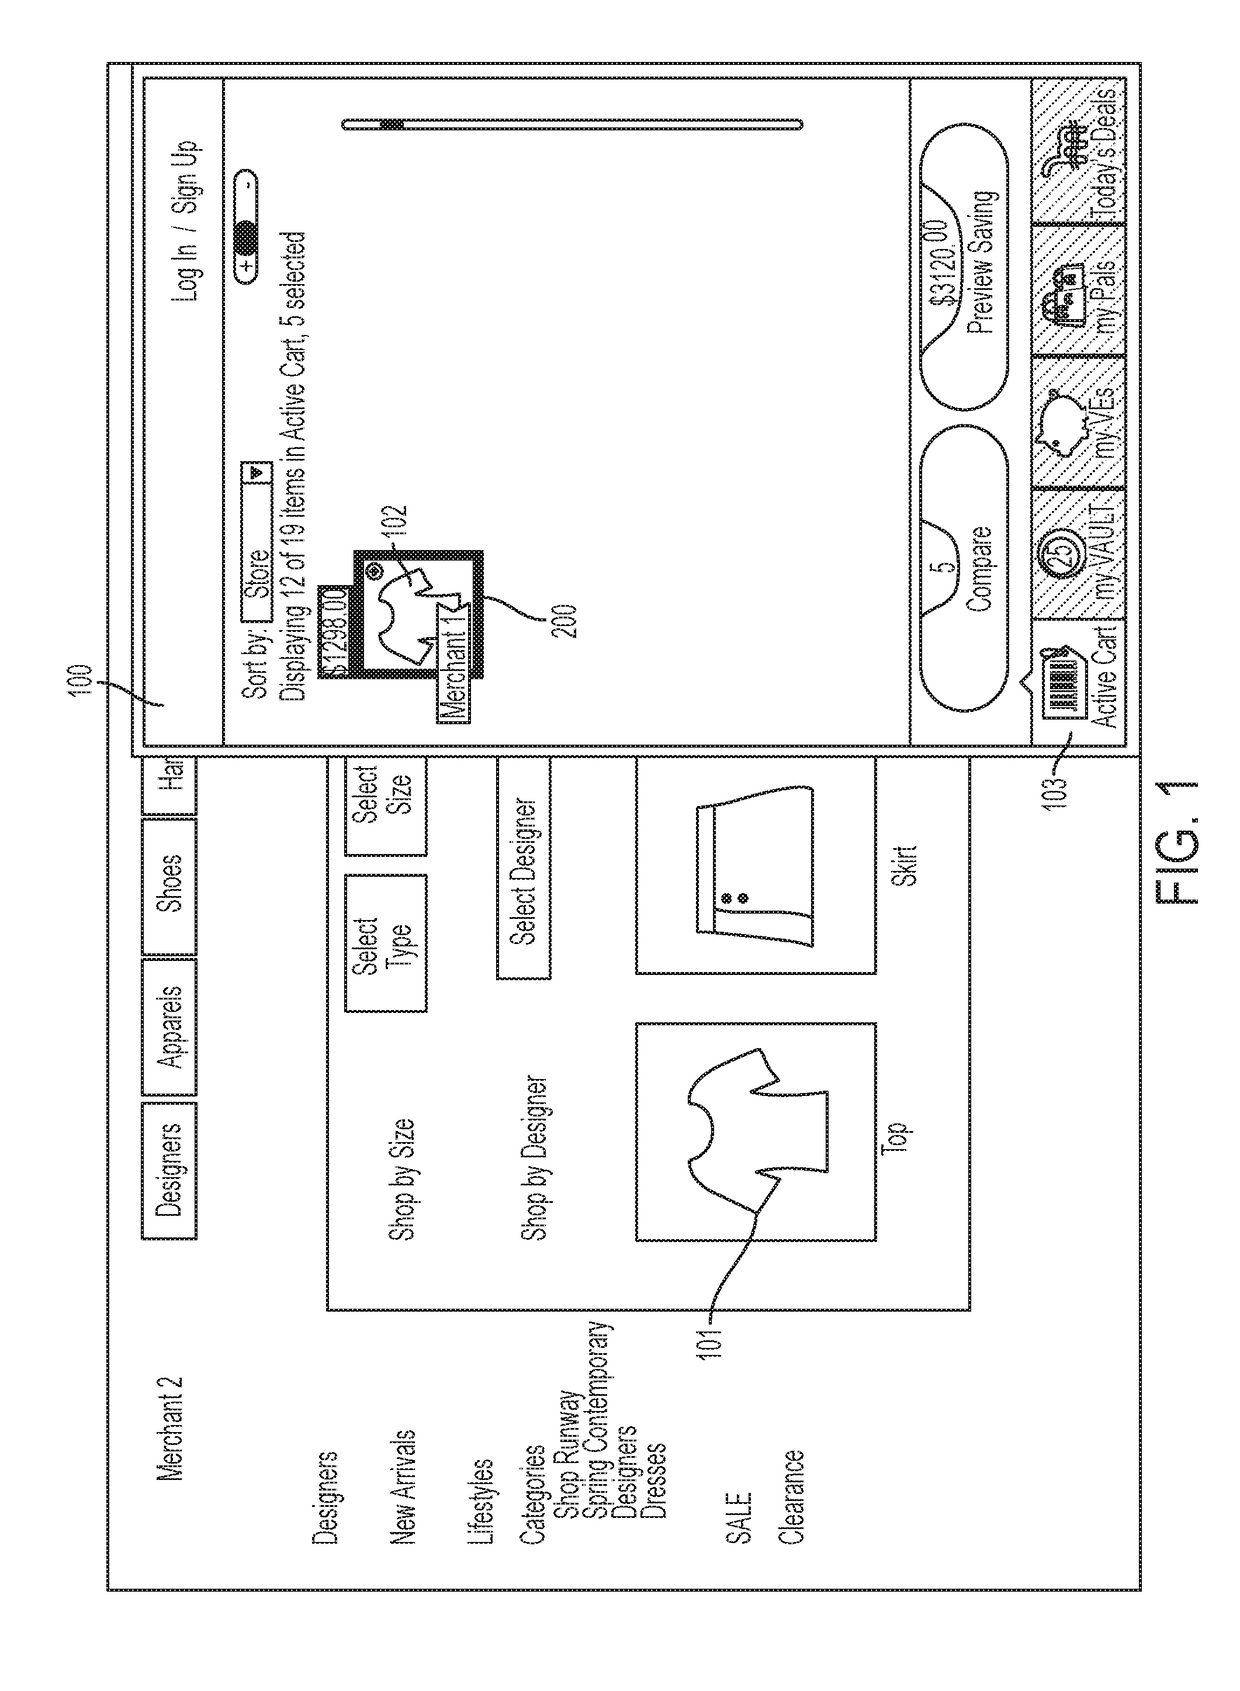 System and method for consumer management purchasing and account information